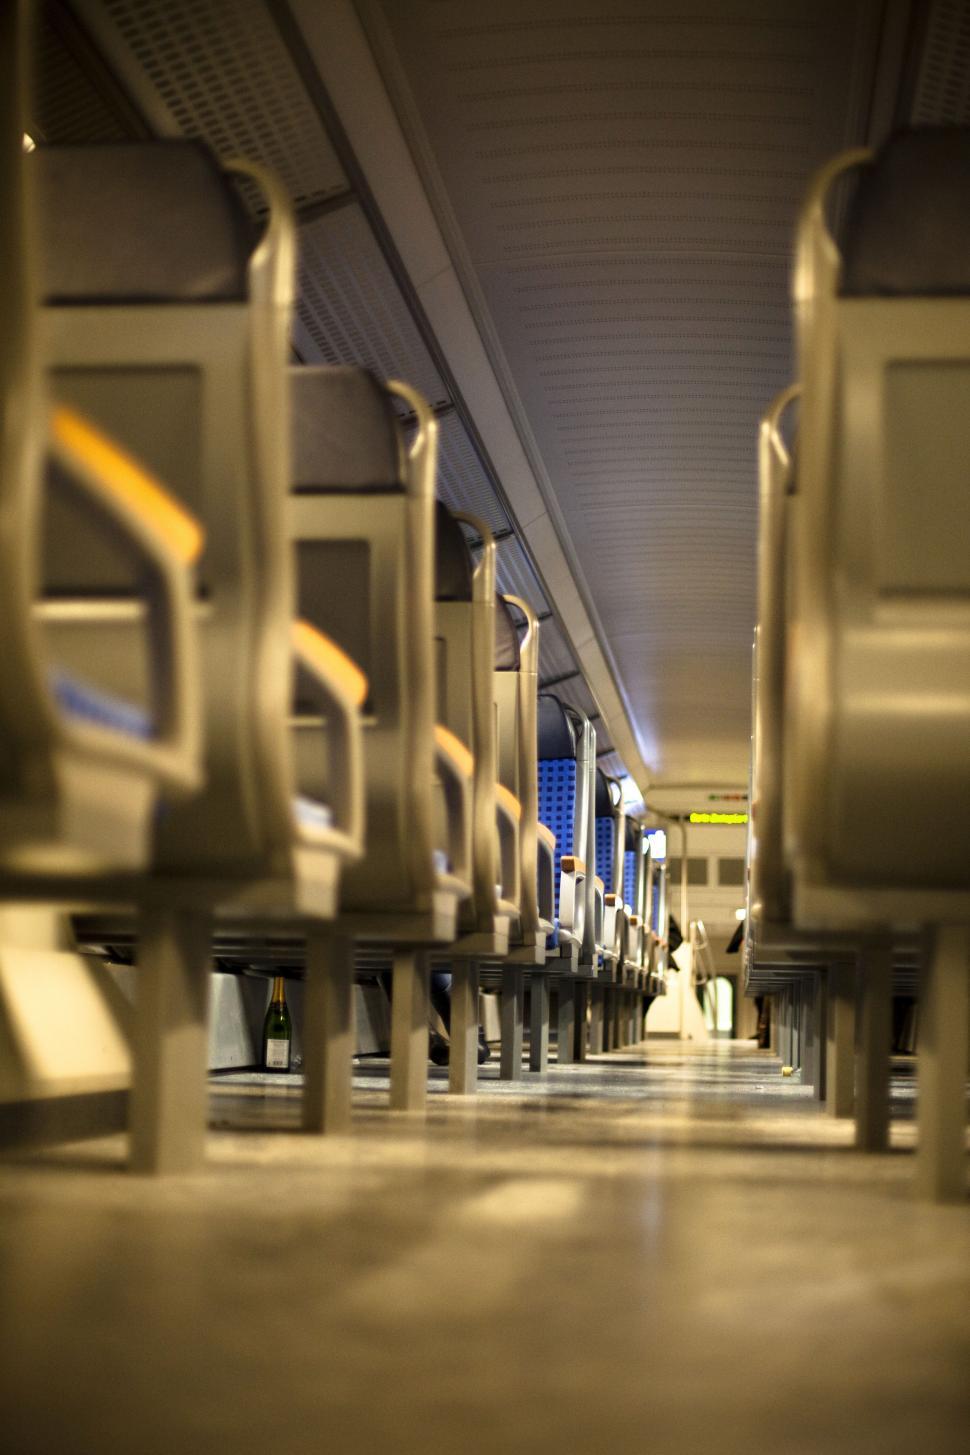 Free Image of Rows of seats in a train 